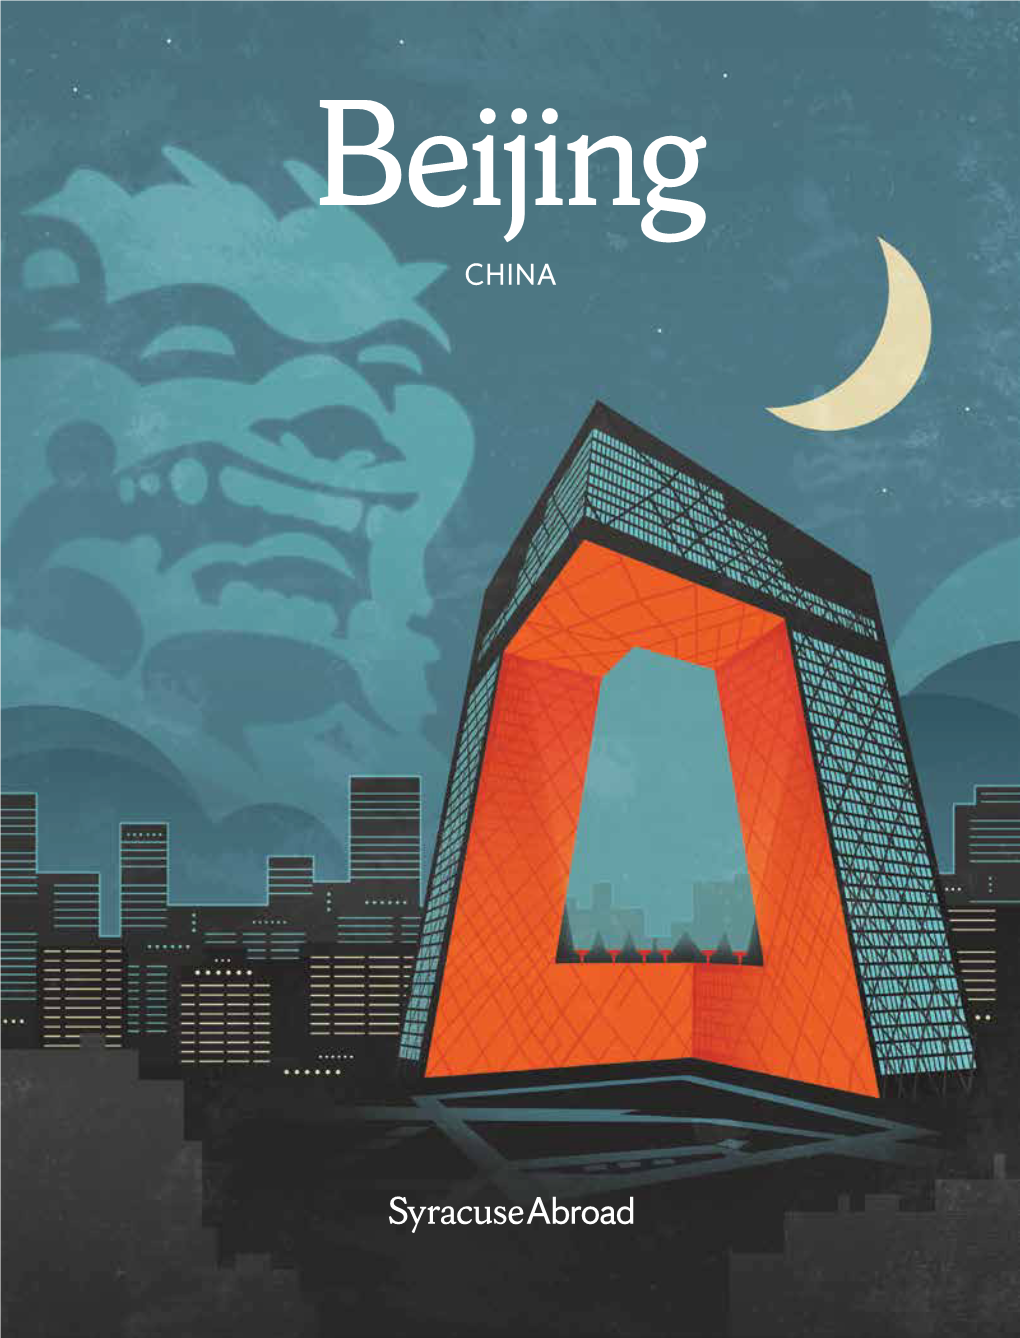 Beijing CHINA Imagine the World Differently